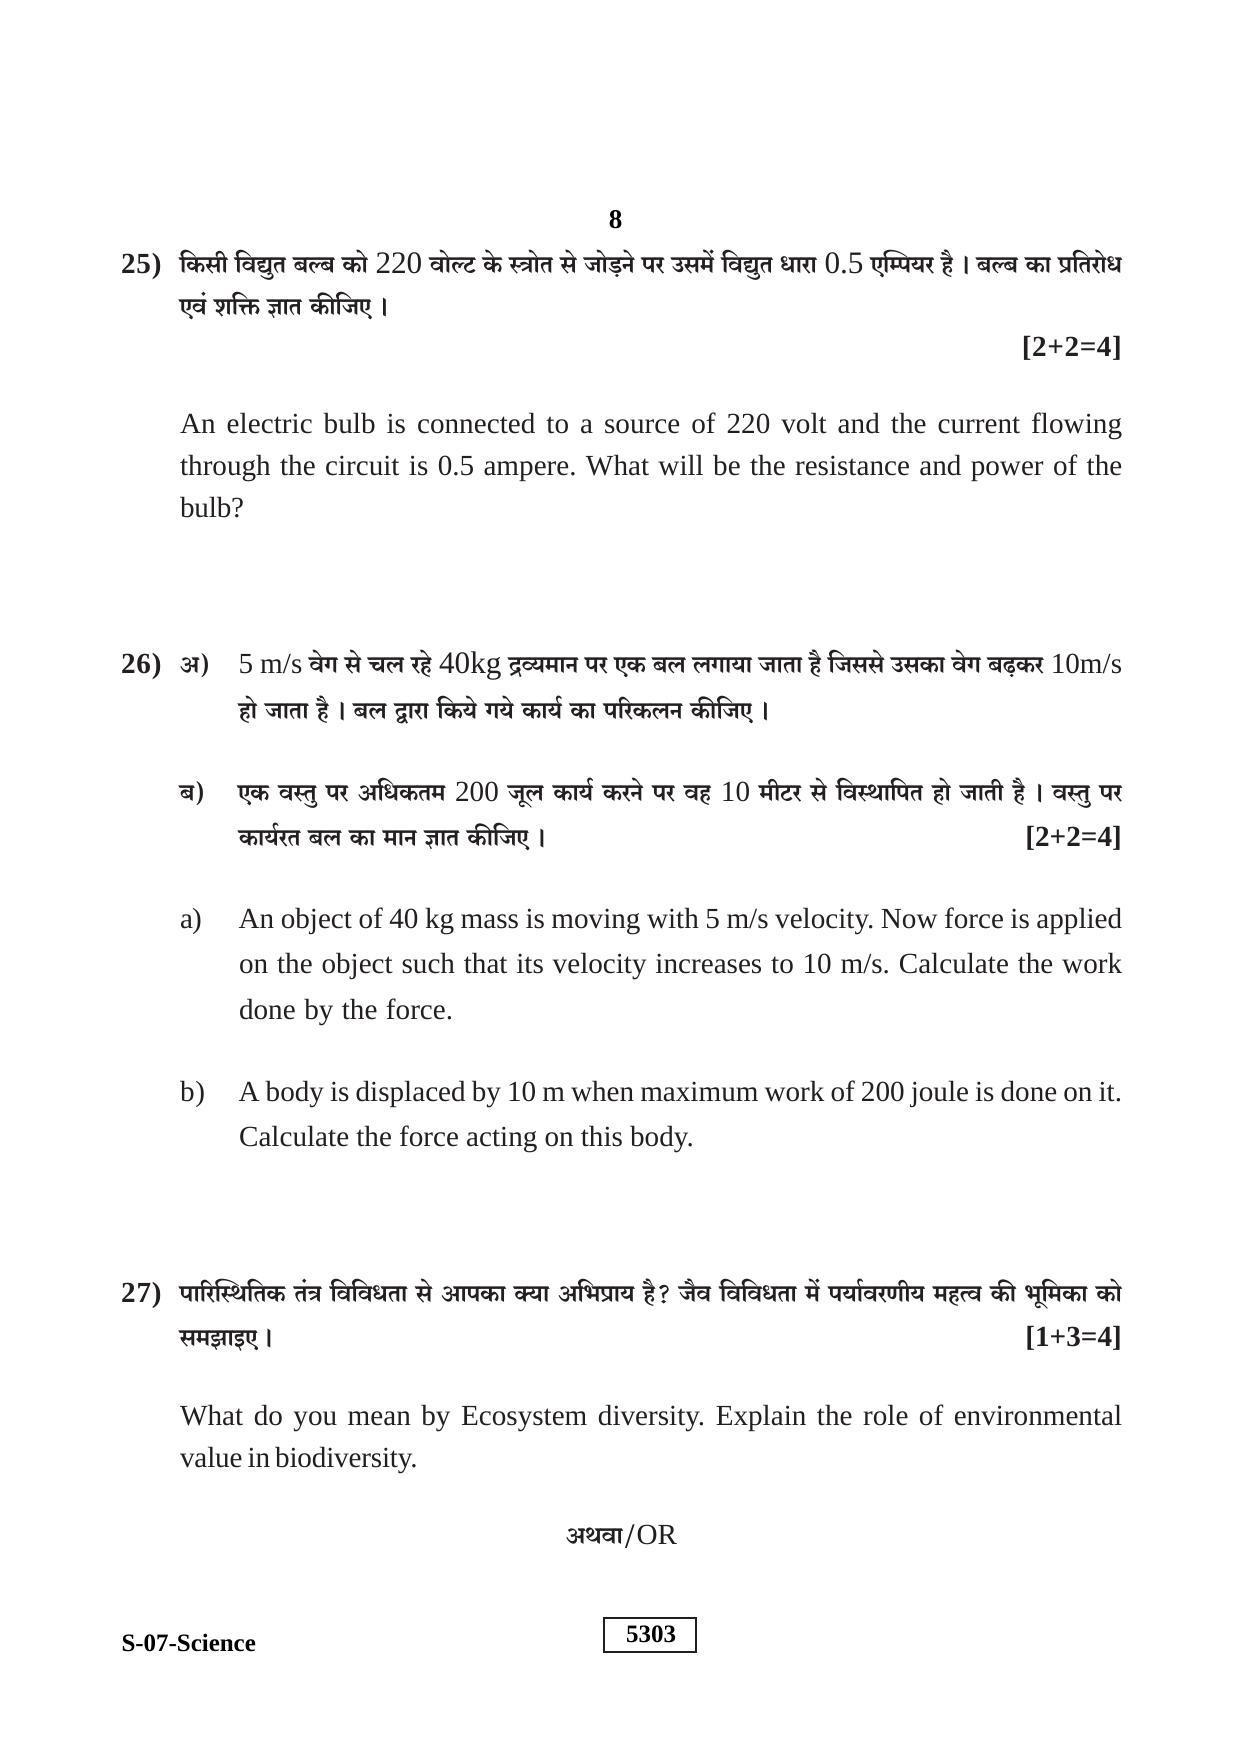 RBSE Class 10 Science 2020 Question Paper - Page 8